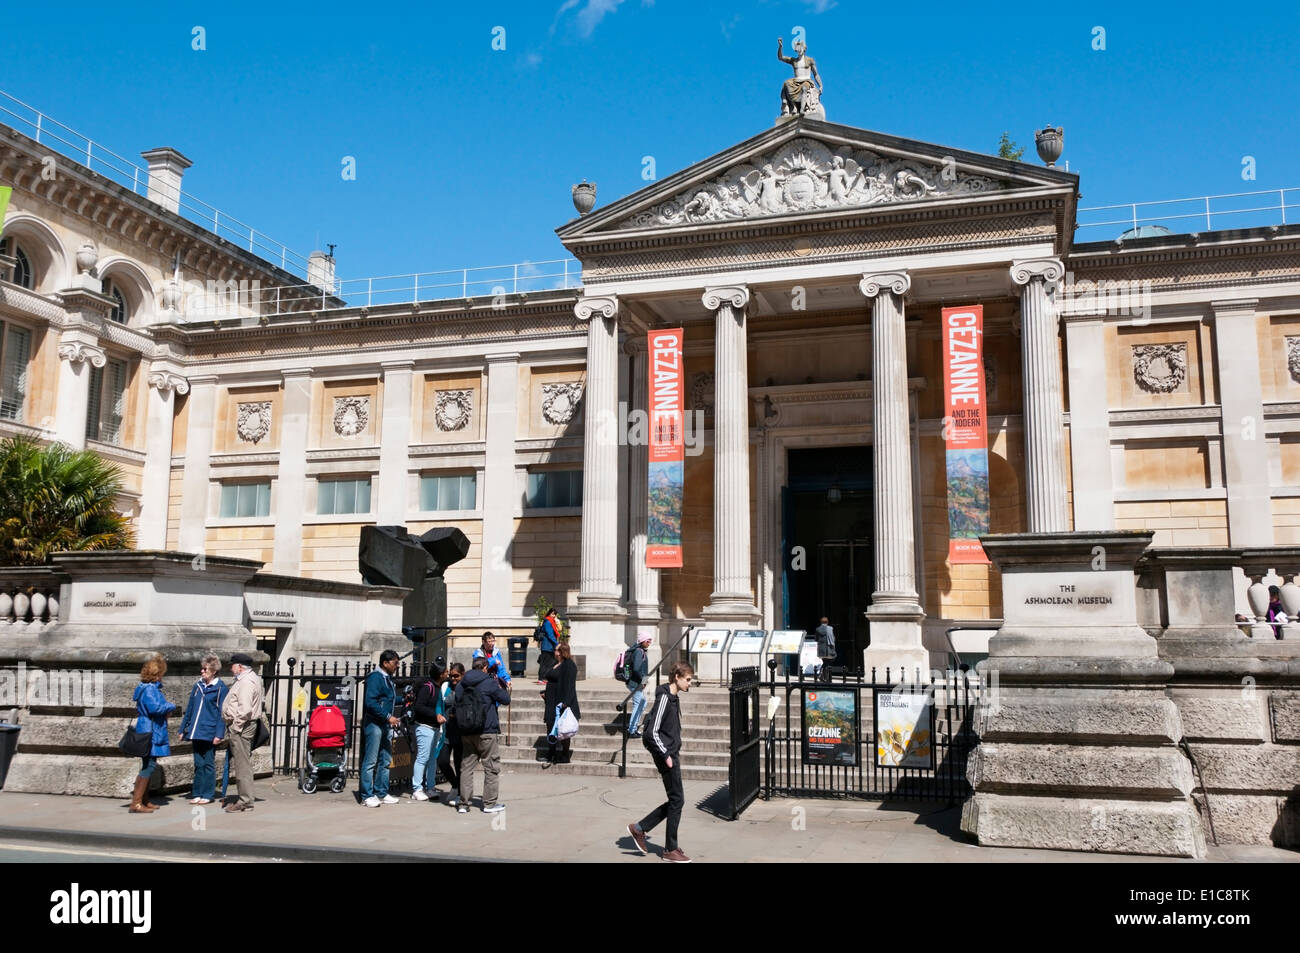 The front entrance to the Ashmolean Museum in Oxford. Stock Photo